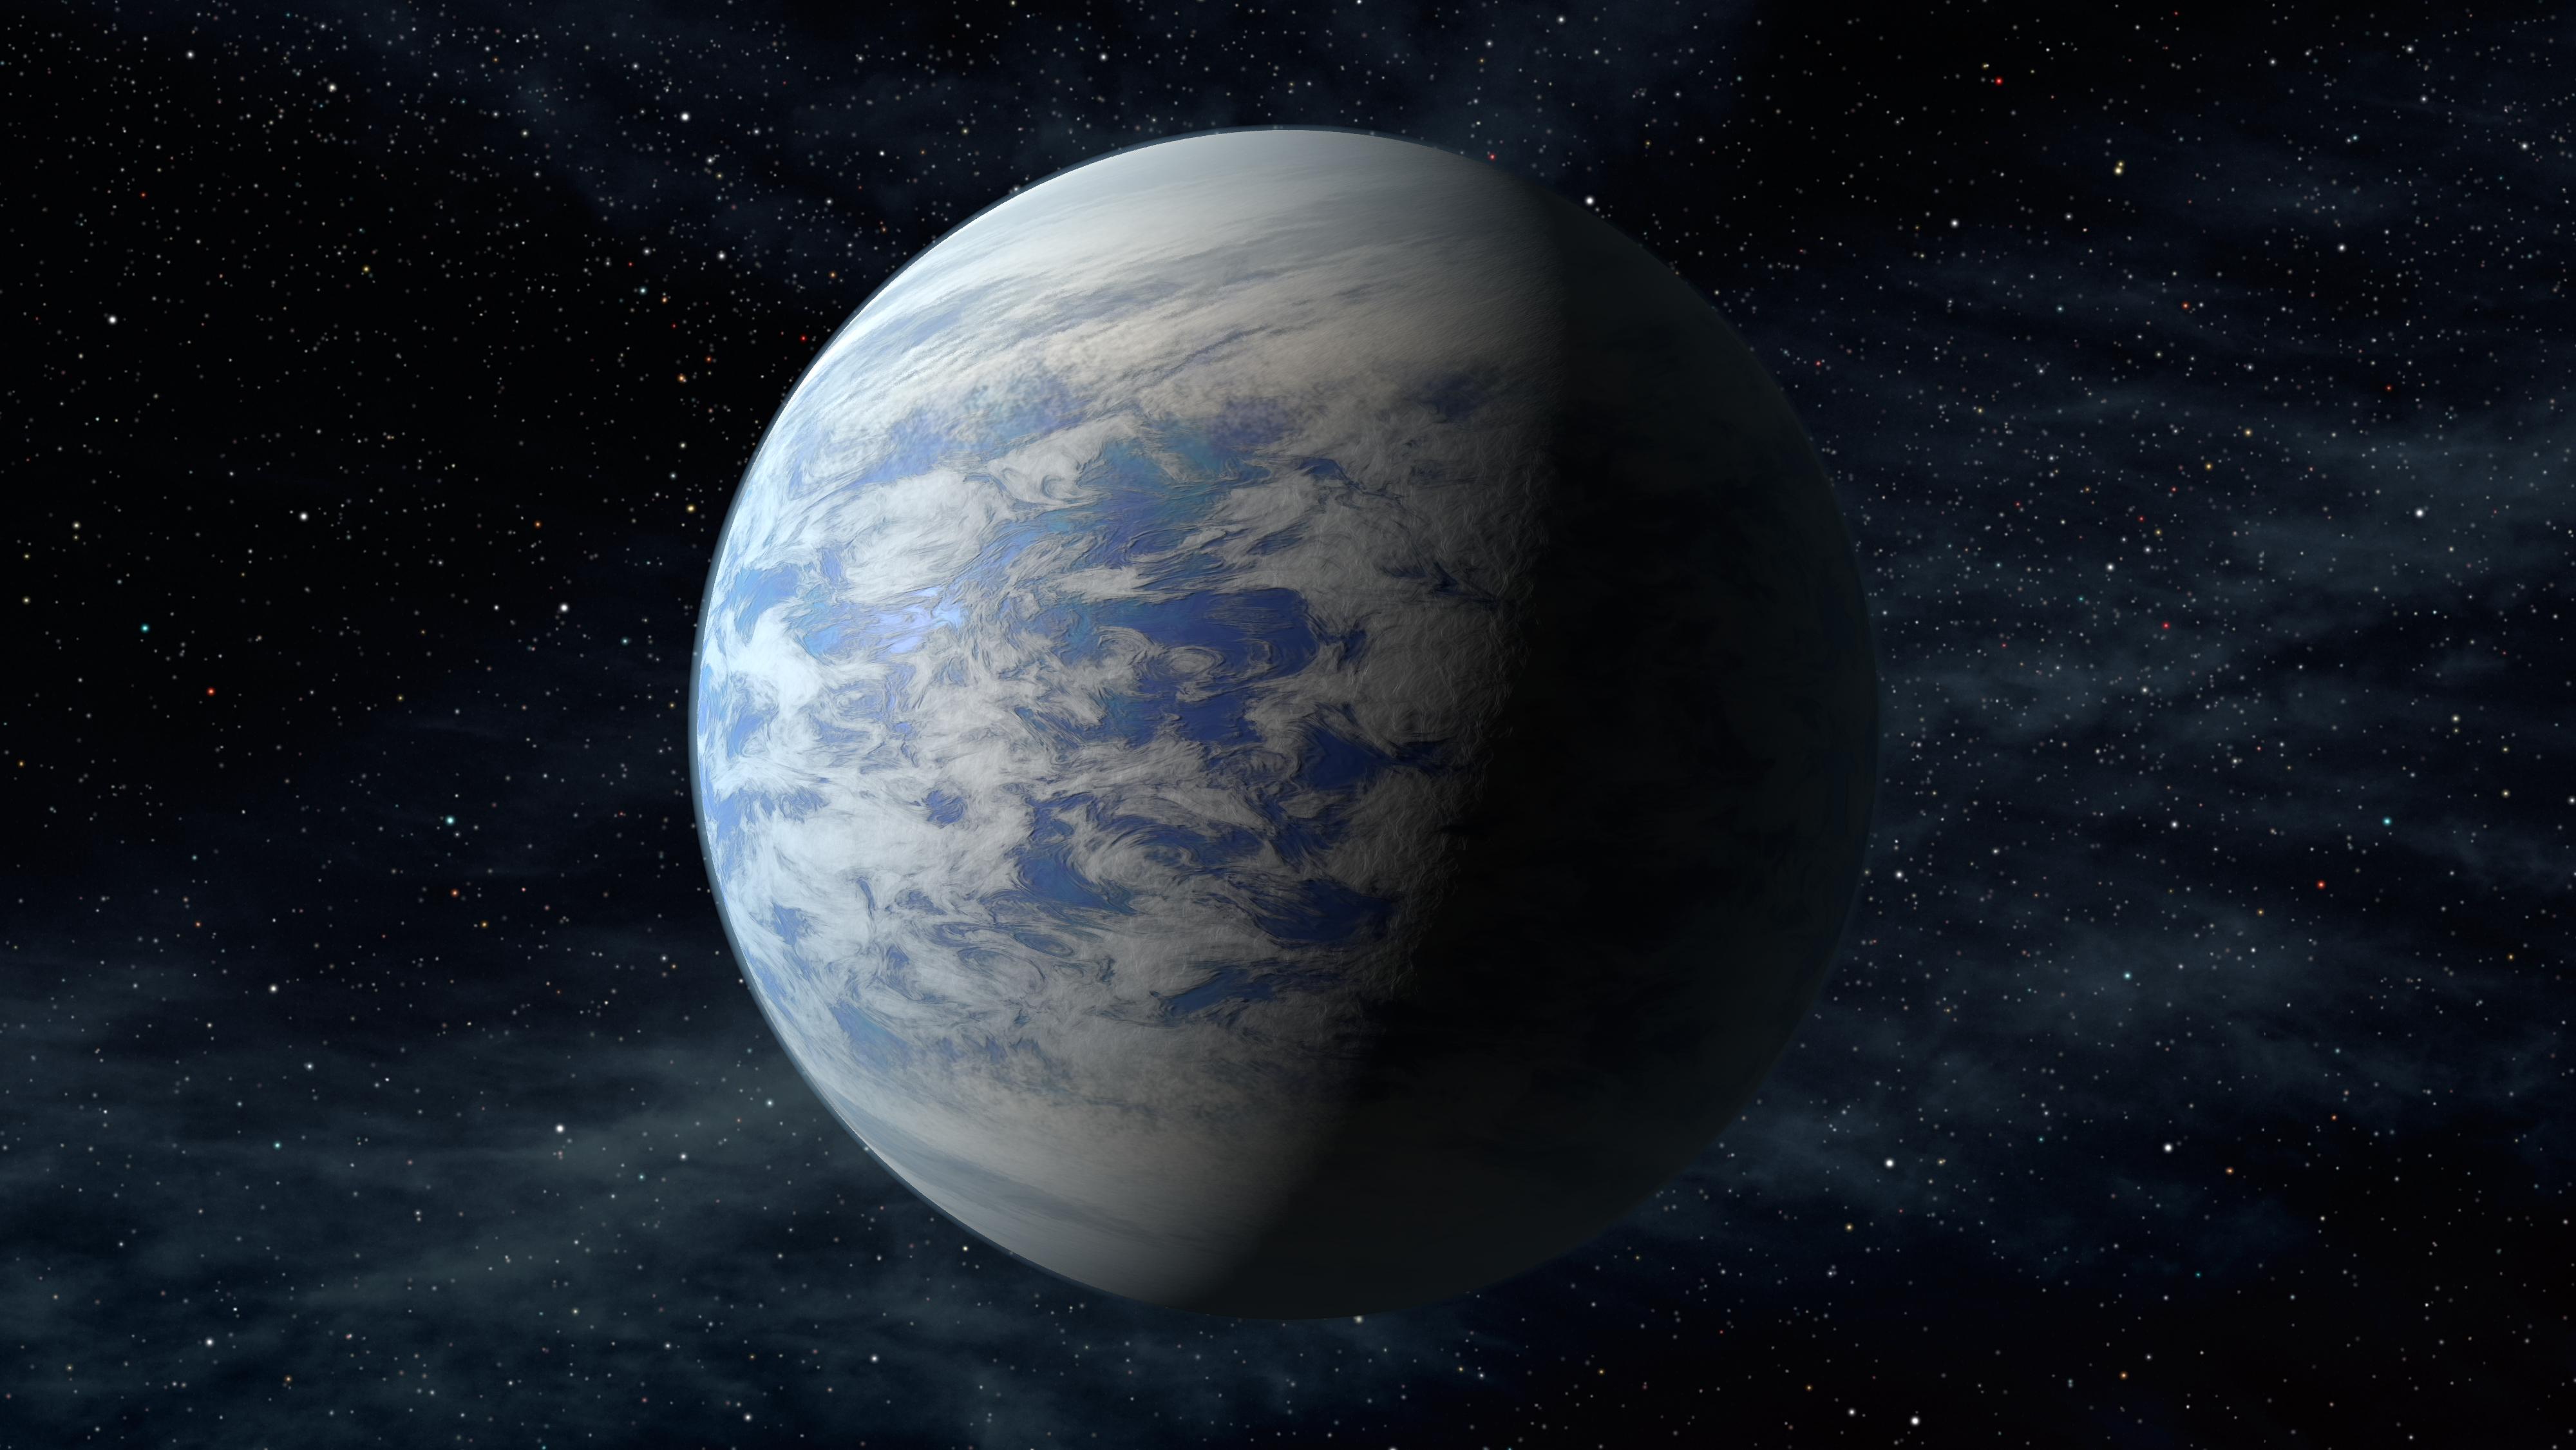 This artist's concept depicts Kepler-69c, a super-Earth-size planet in the habitable zone of a star like our sun, located about 2,700 light-years from Earth in the constellation Cygnus. Credit: NASA/Ames/JPL-Caltech  